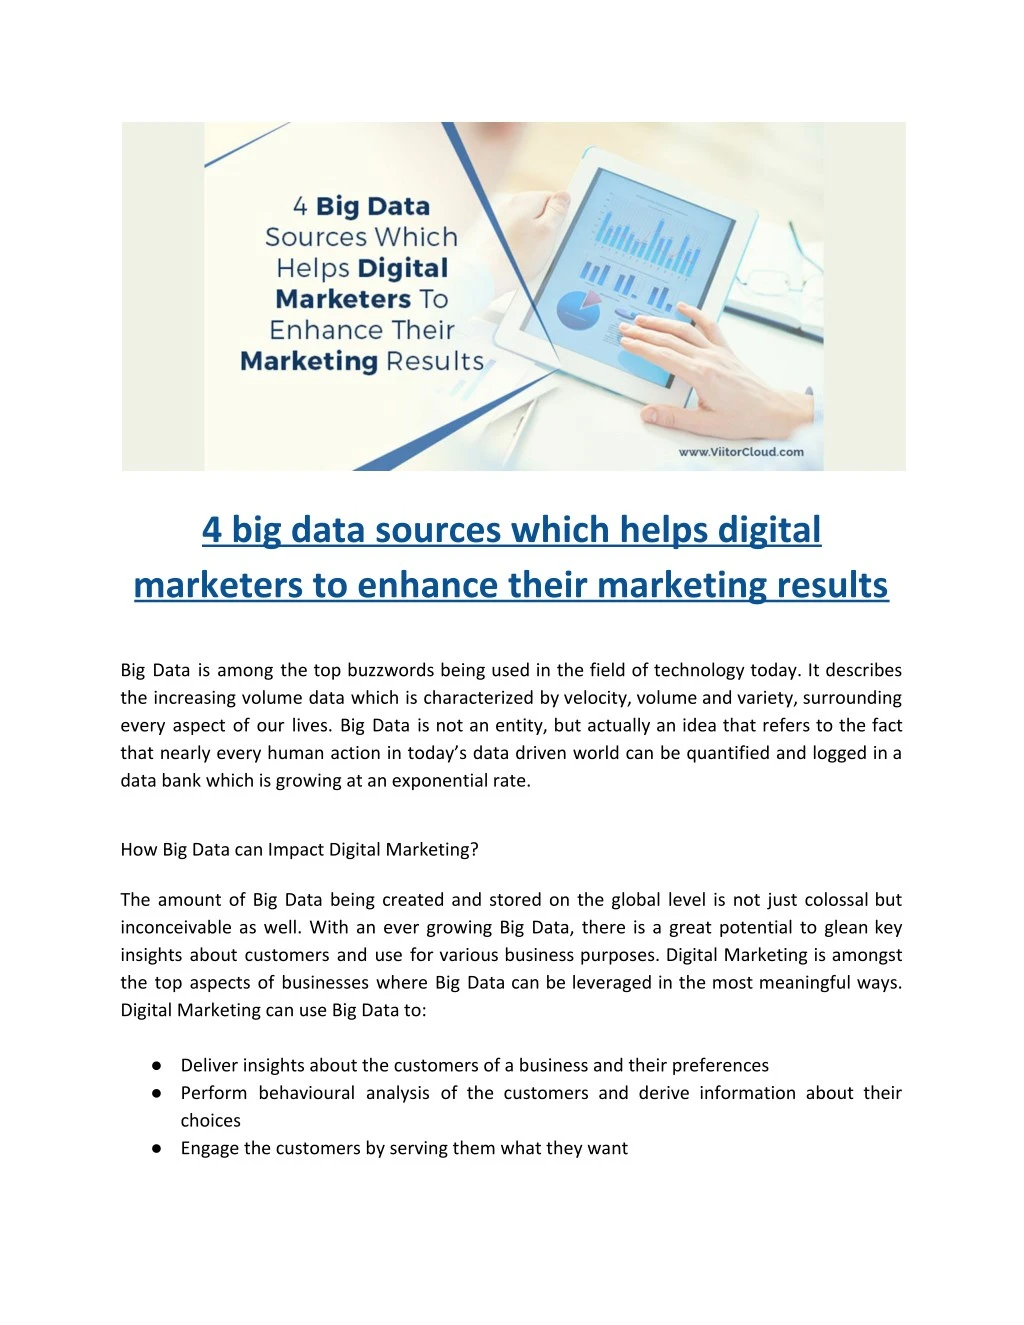 4 big data sources which helps digital marketers